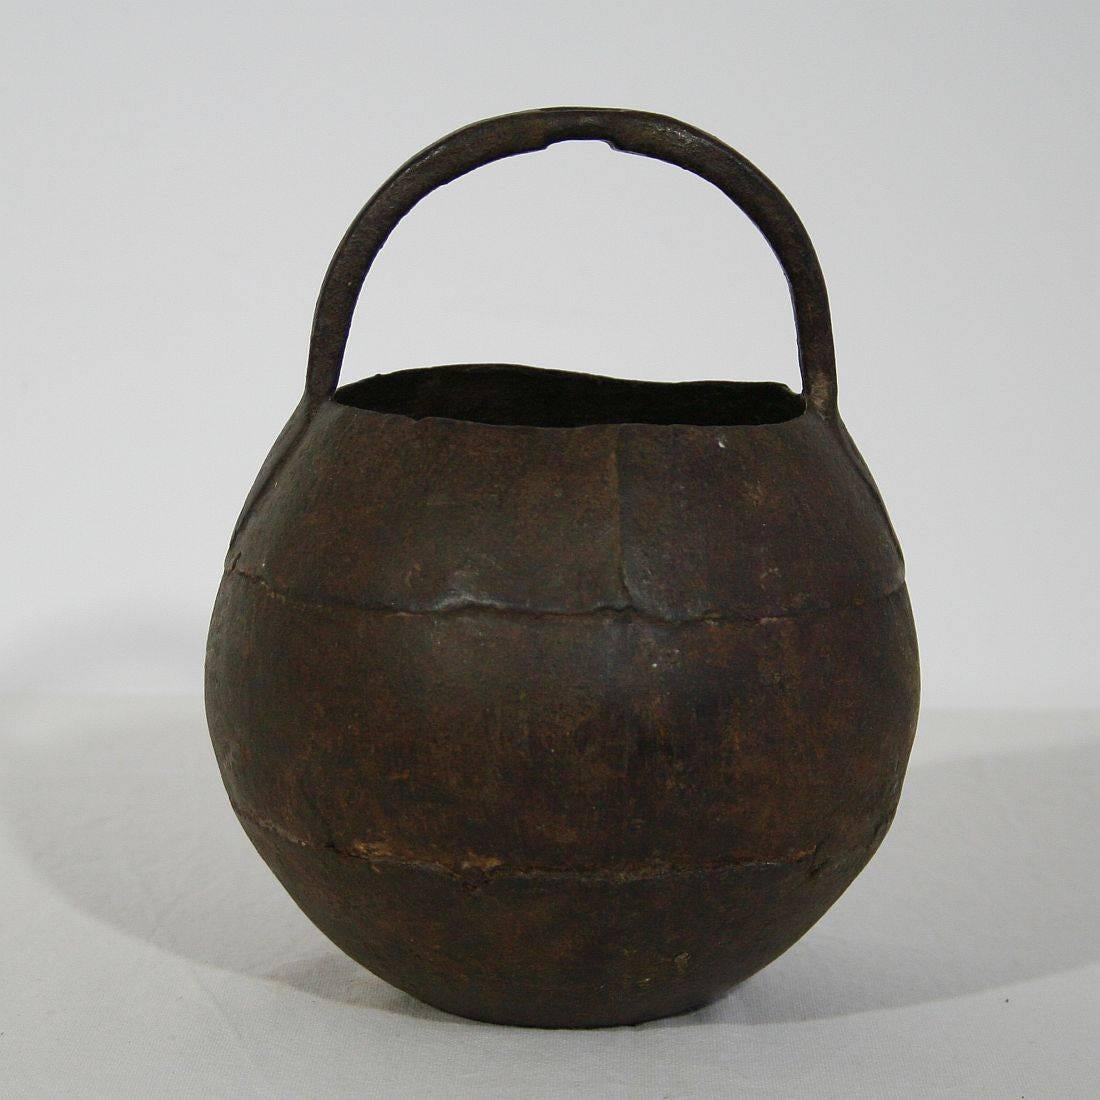 Primitive 18th Century Hand-Forged Iron Cooking Pot 1